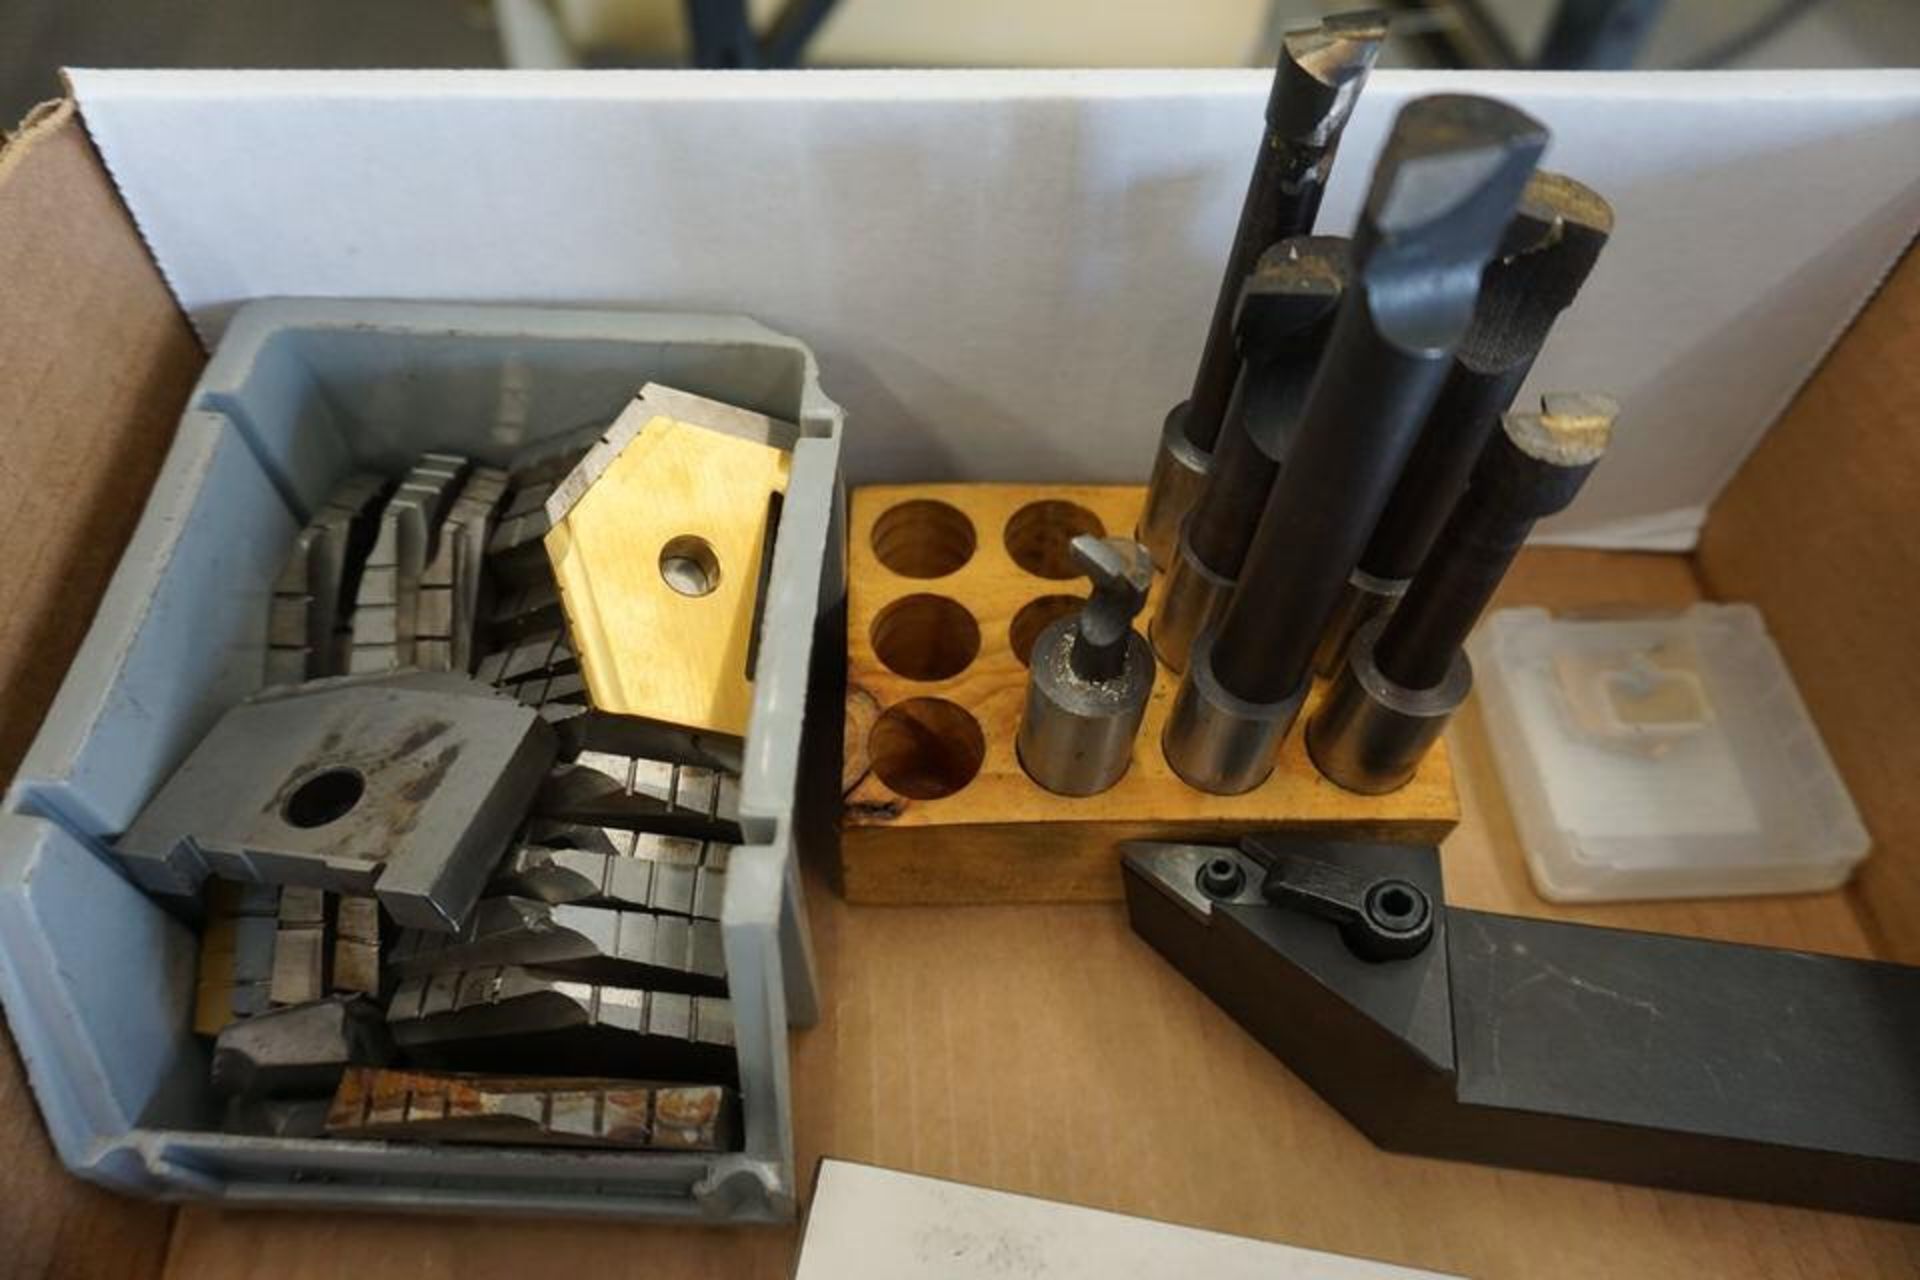 LATHE TOOLING, BORING BARS, CARBIDE TIPPED DRILLS, SPADE DRILL BITS, INSERT TOOL HOLDERS - Image 3 of 3